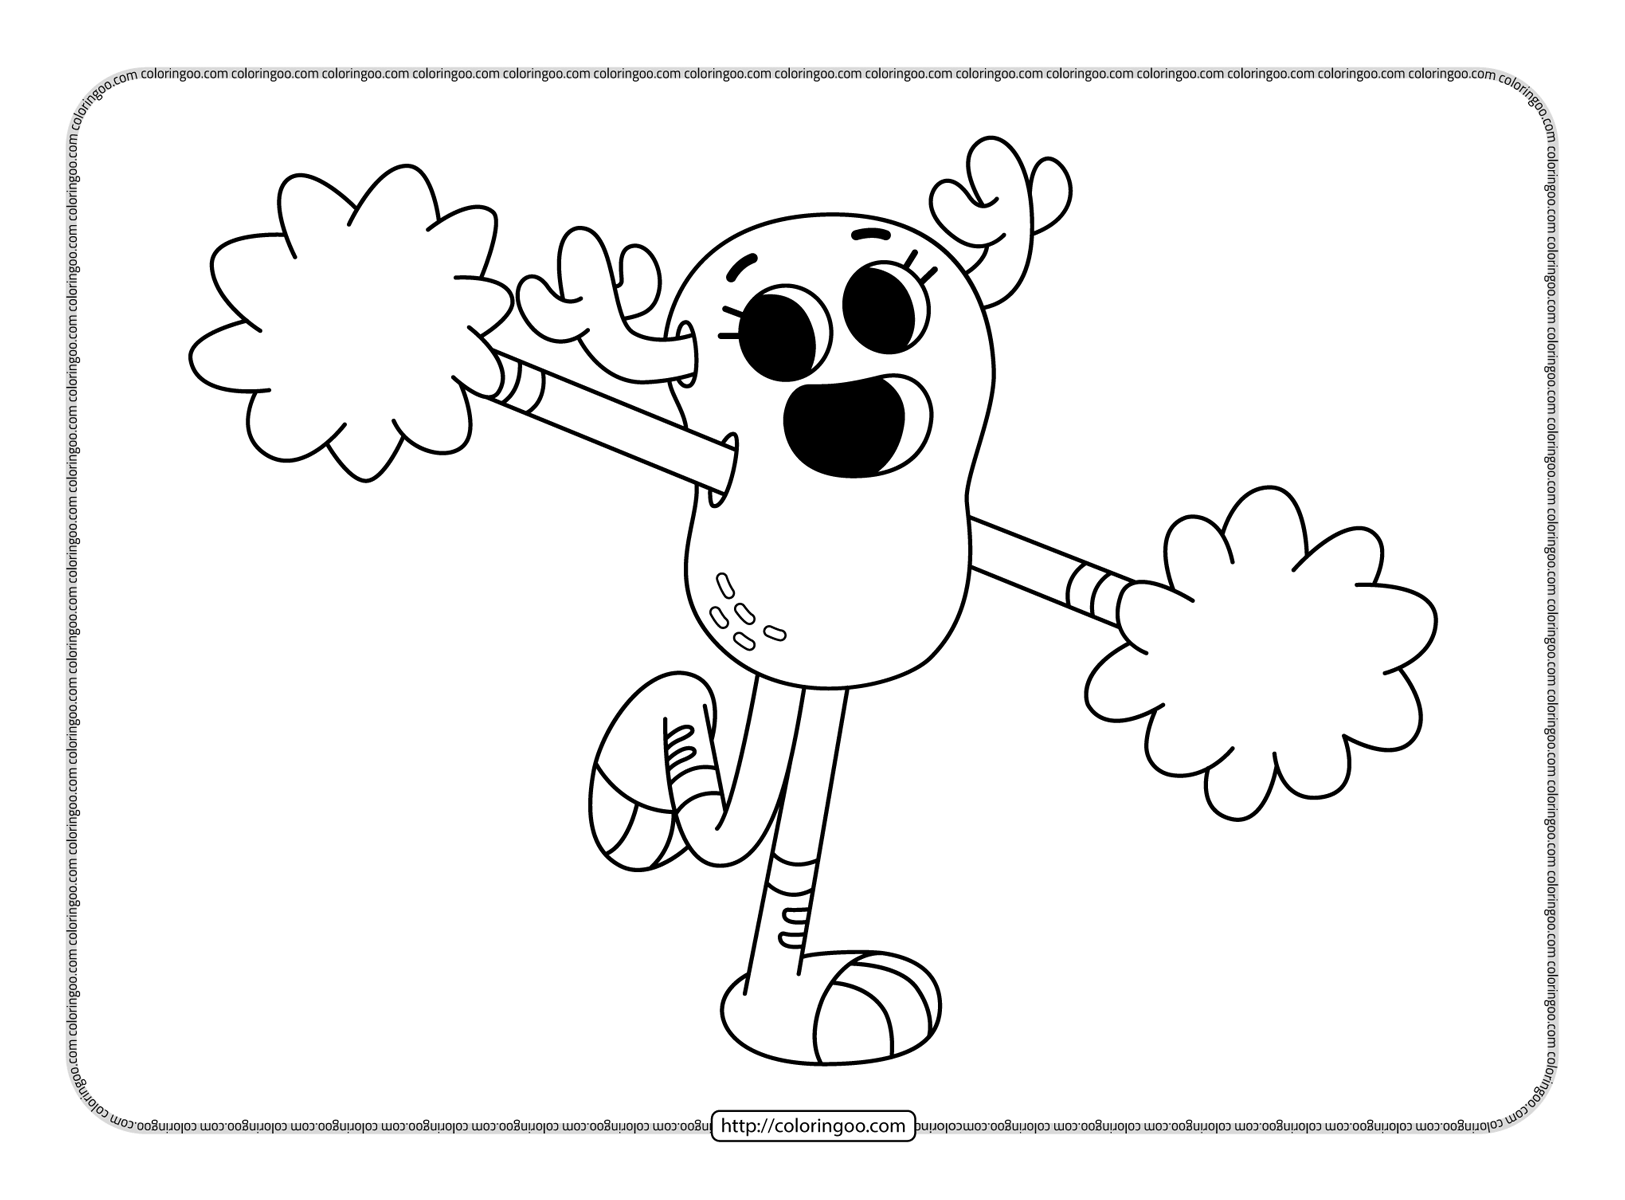 penny fitzgerald pdf coloring pages